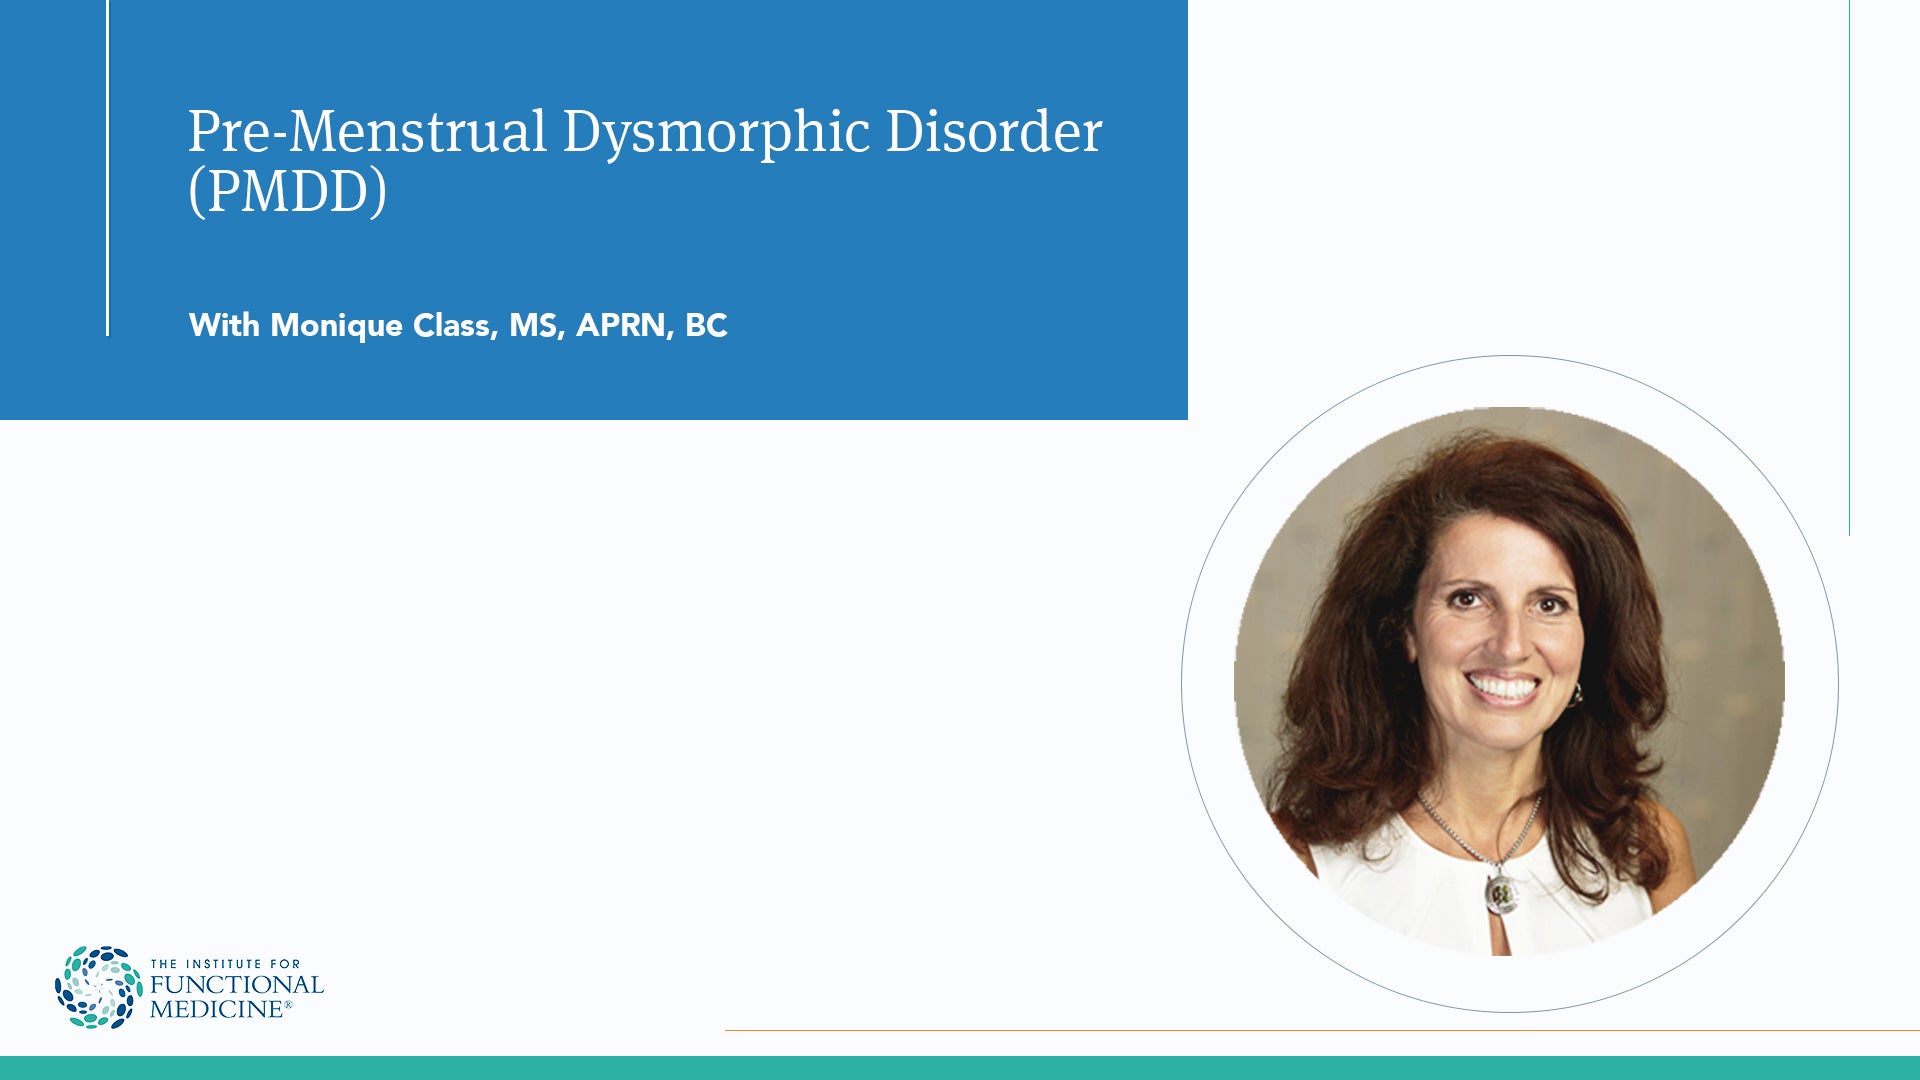 Premenstrual Dysphoric Disorder (PMDD) is a severe form of